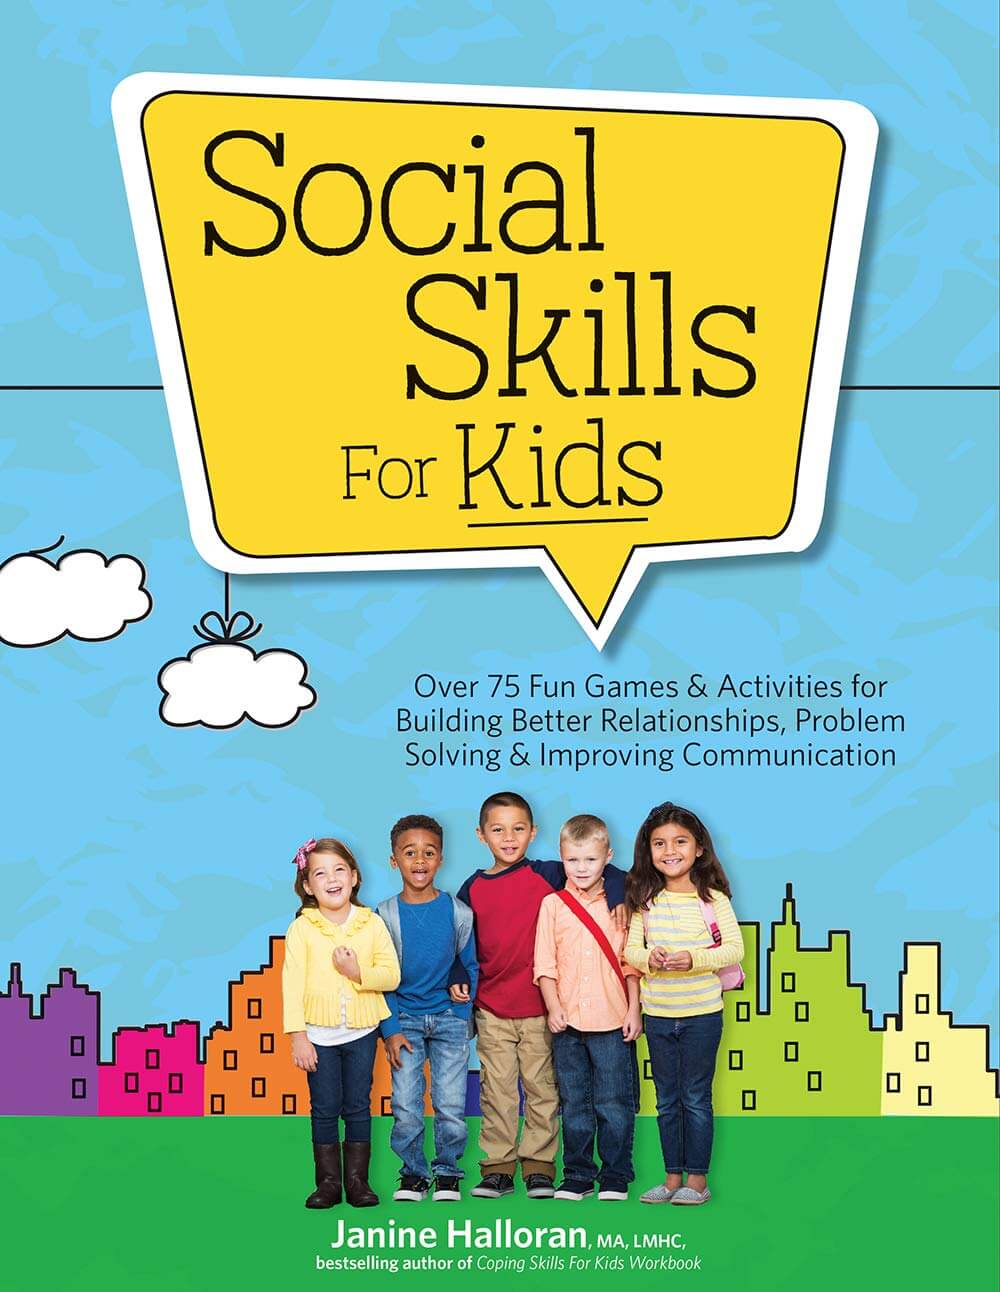 Social Skills for Kids - Over 75 Fun Games & Activities For Building Better Relationships, Problem Solving & Improving Communication